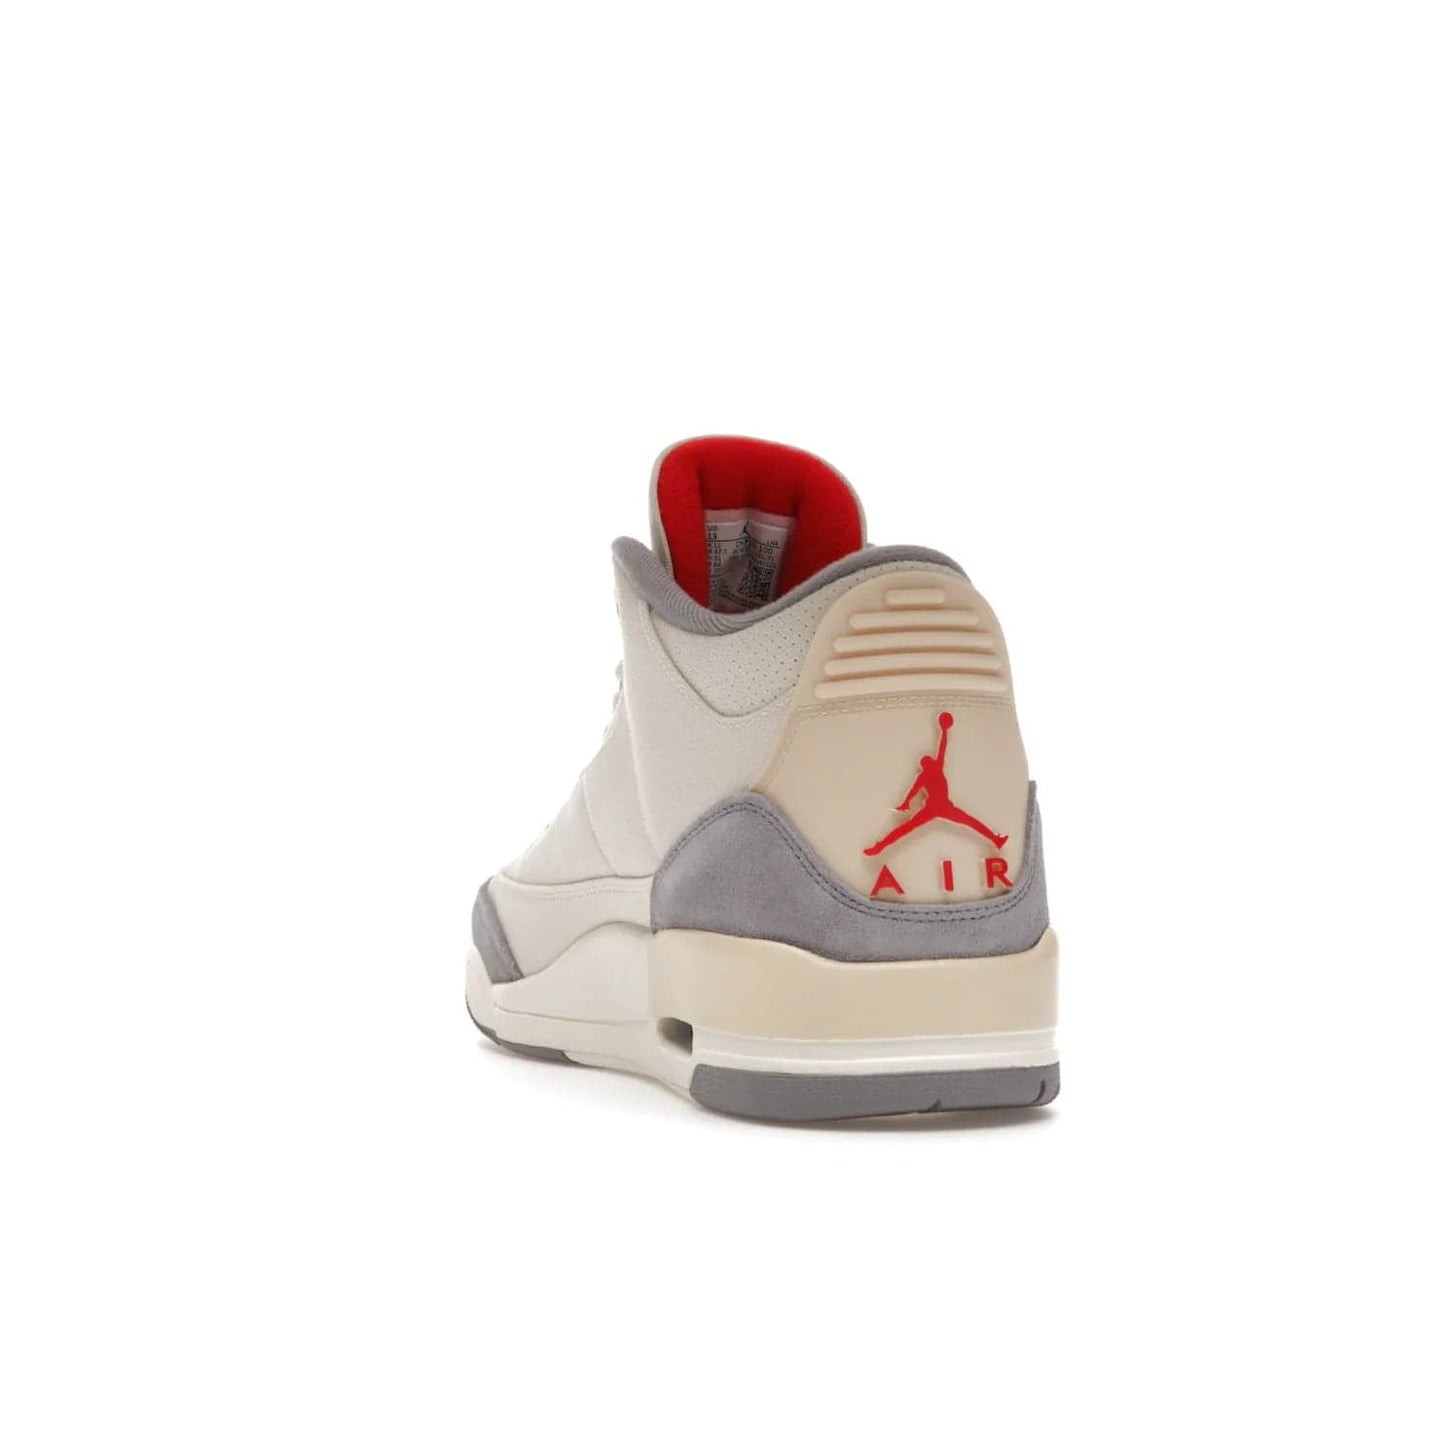 Jordan 3 Retro Muslin - Image 26 - Only at www.BallersClubKickz.com - Eye-catching Air Jordan 3 Retro Muslin in a neutral palette of grey, cream, and red. Featuring canvas upper, suede overlays and white/grey Air Max sole. Available in March 2022.